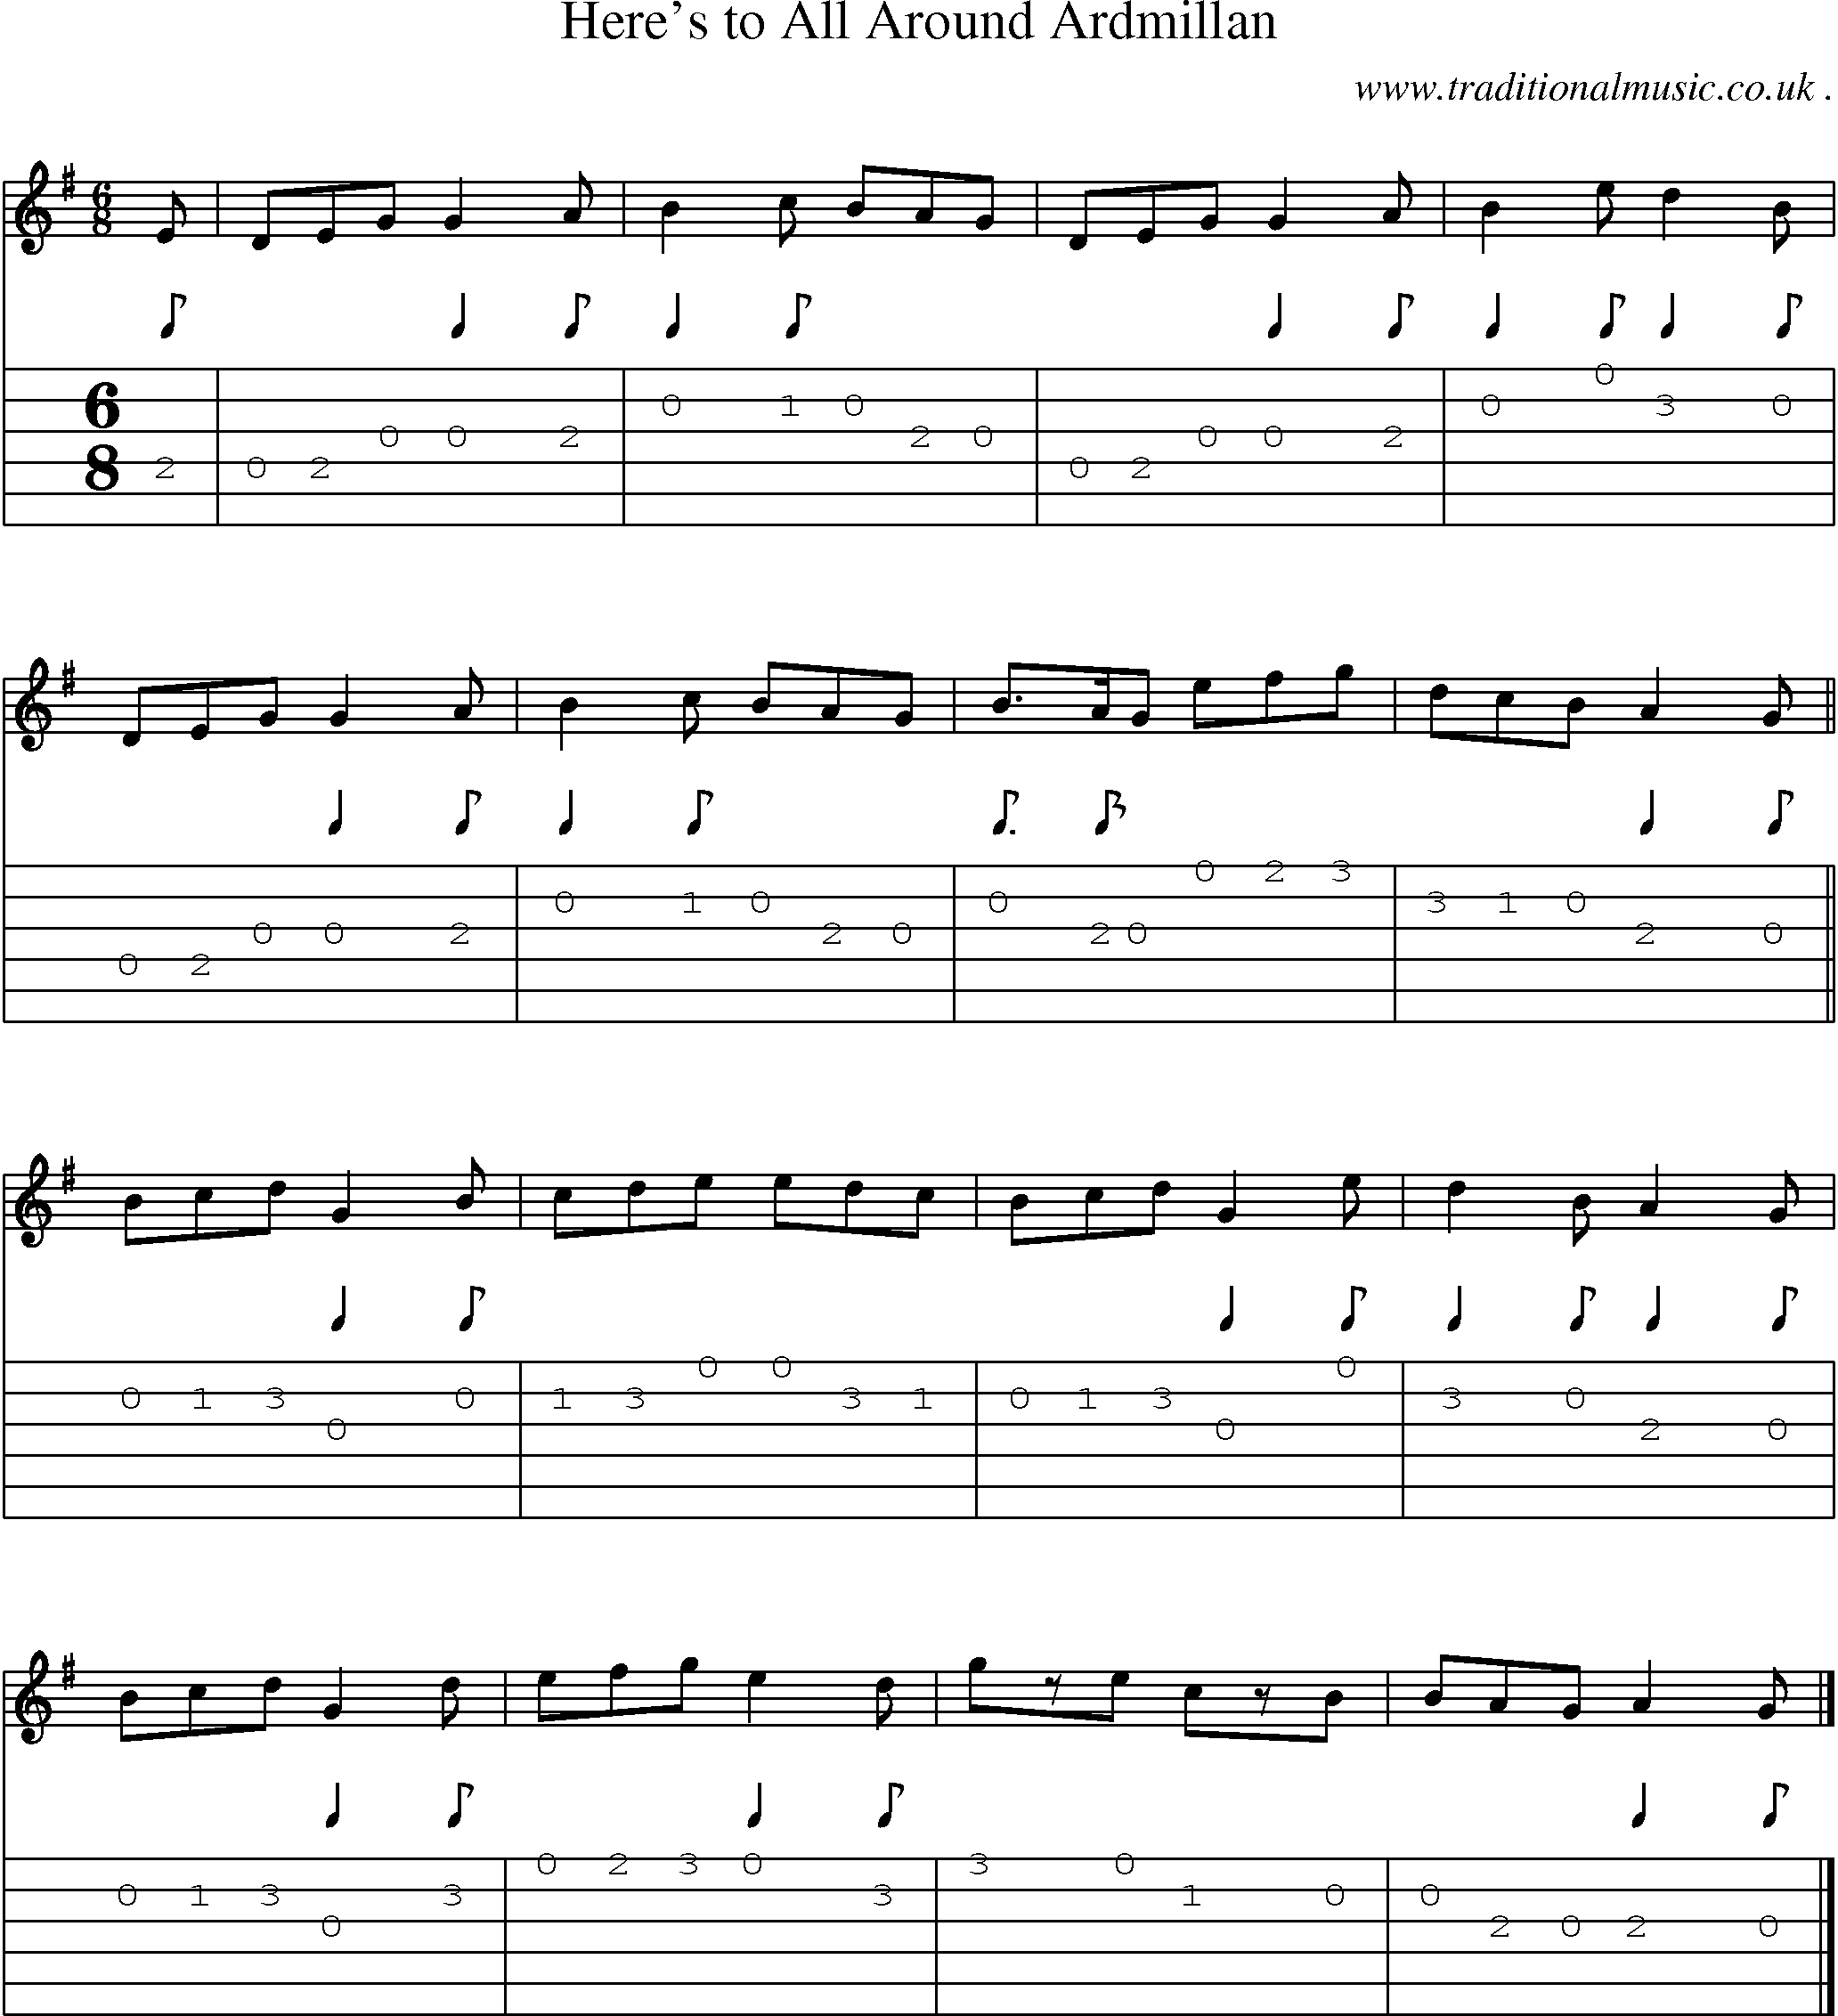 Sheet-music  score, Chords and Guitar Tabs for Heres To All Around Ardmillan